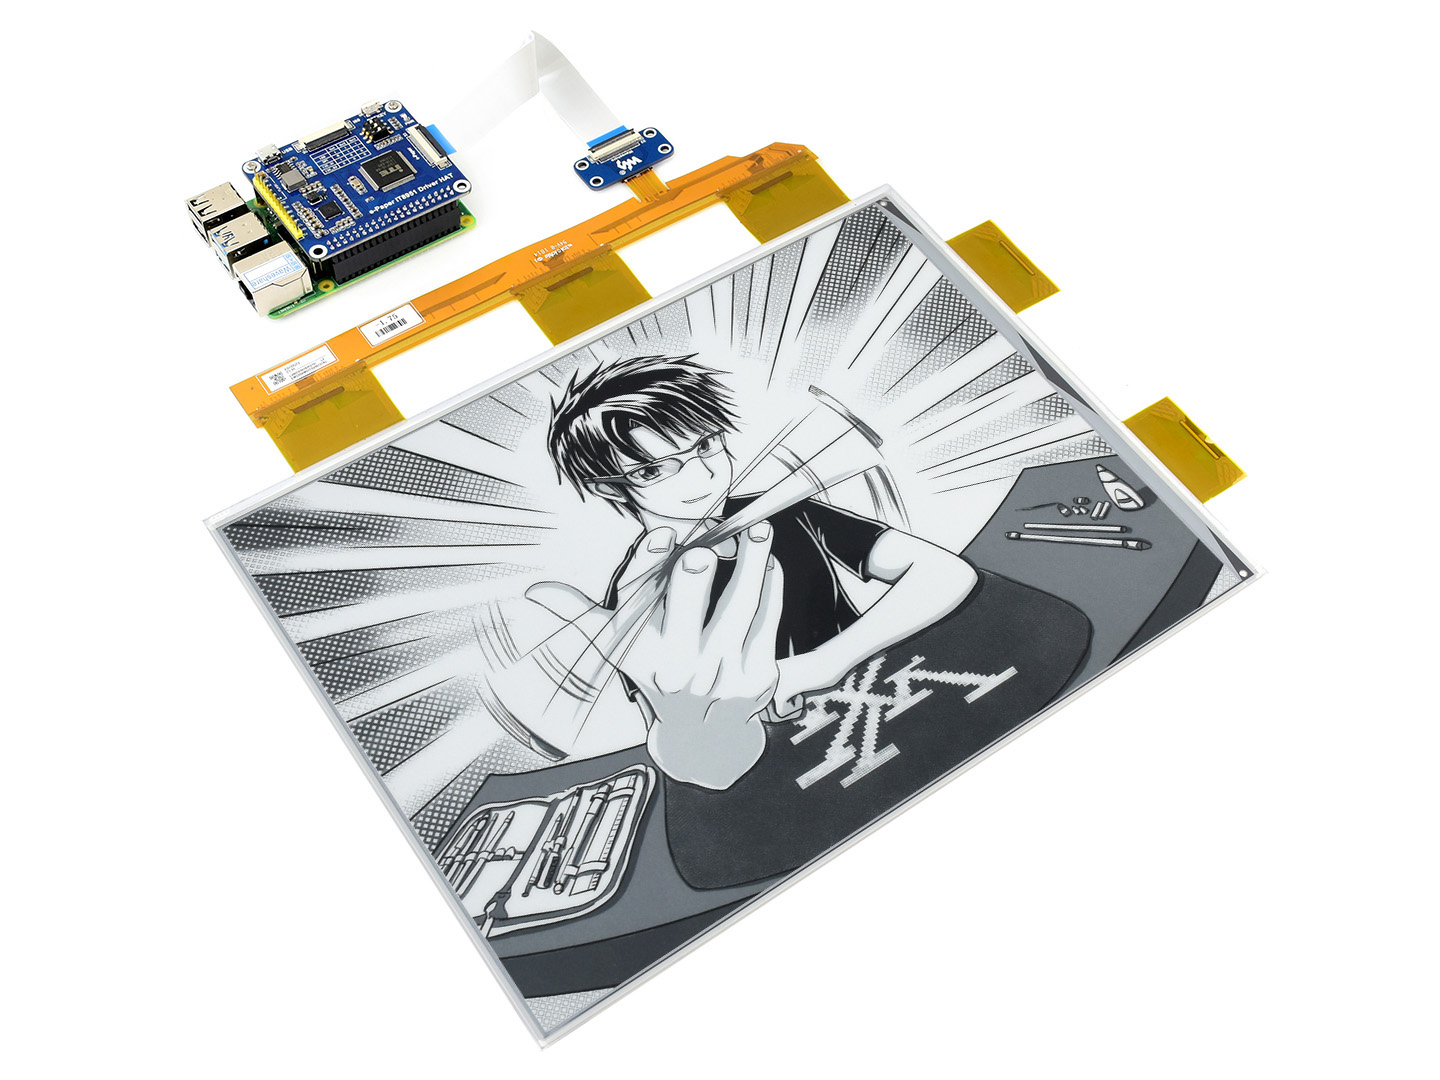 13.3inch e-Paper e-Ink Display HAT For Raspberry Pi, 1600*1200, Black / White, 16 Grey Scales, USB /